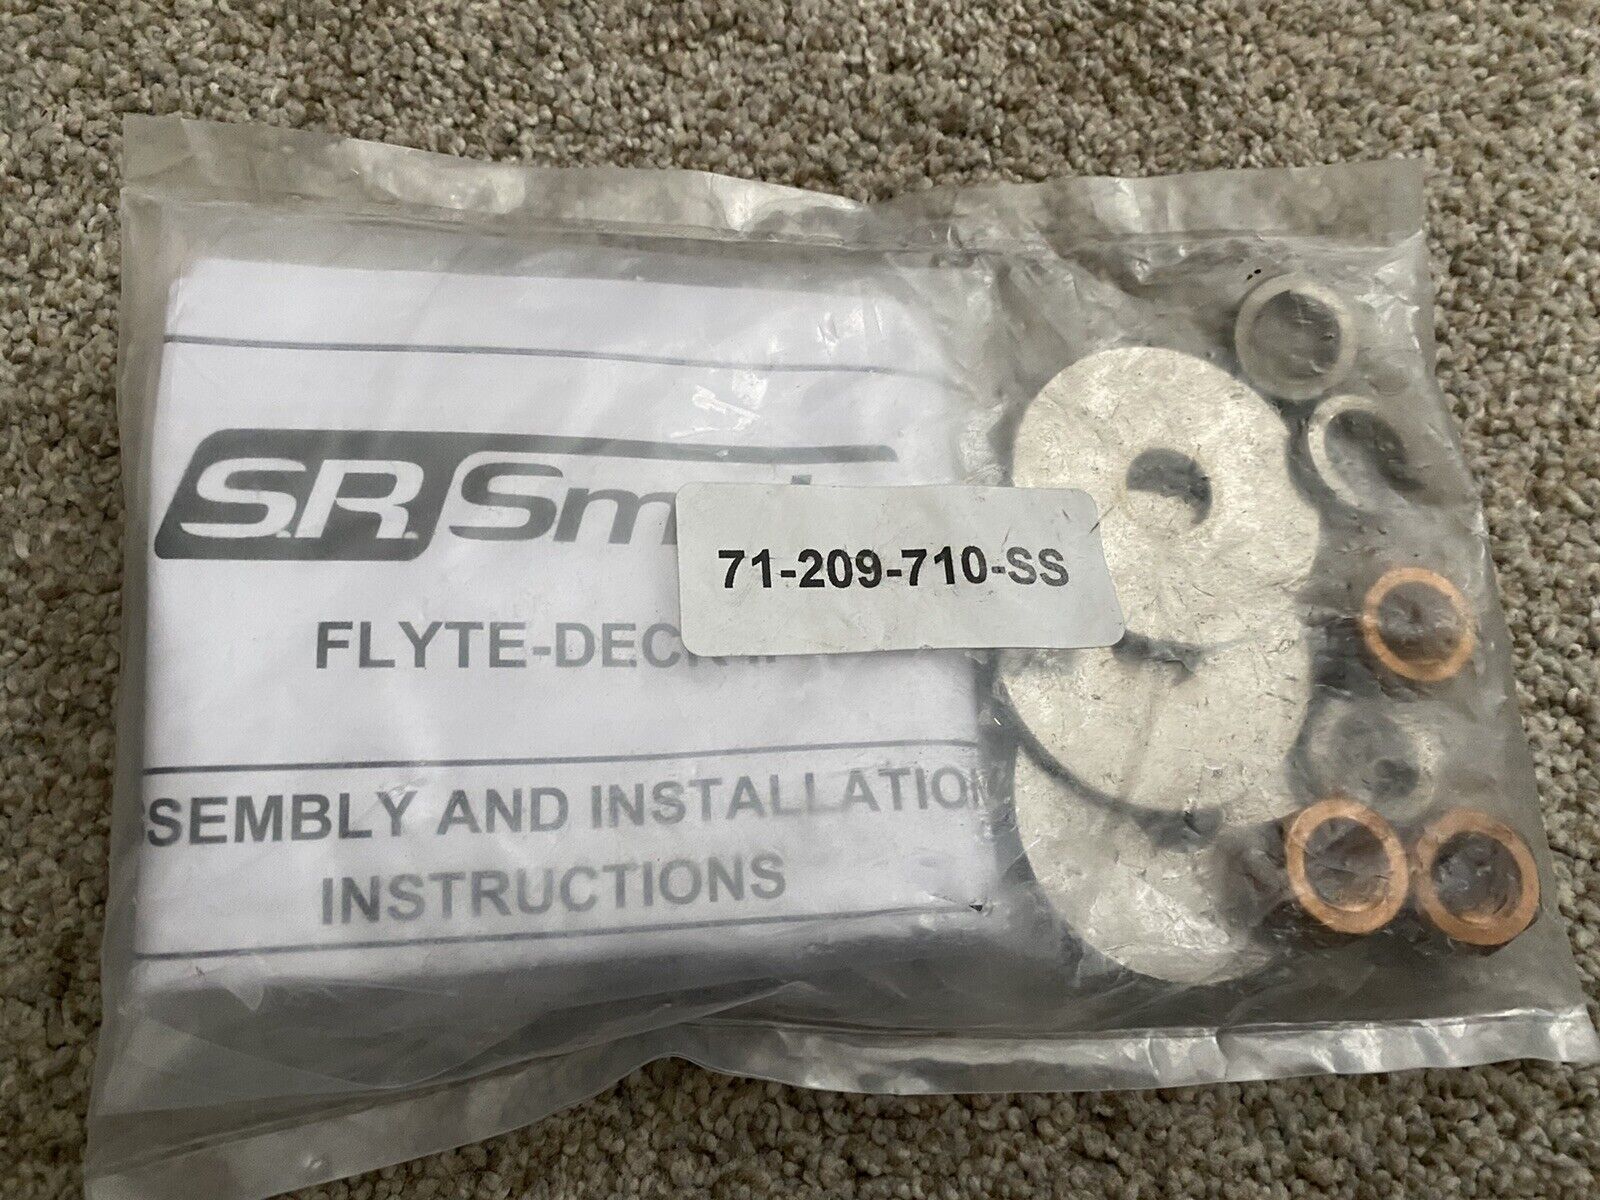 S.r. Smith 71-209-710-ss Flyte-deck Ii Diving Board Stand Bolt Kit